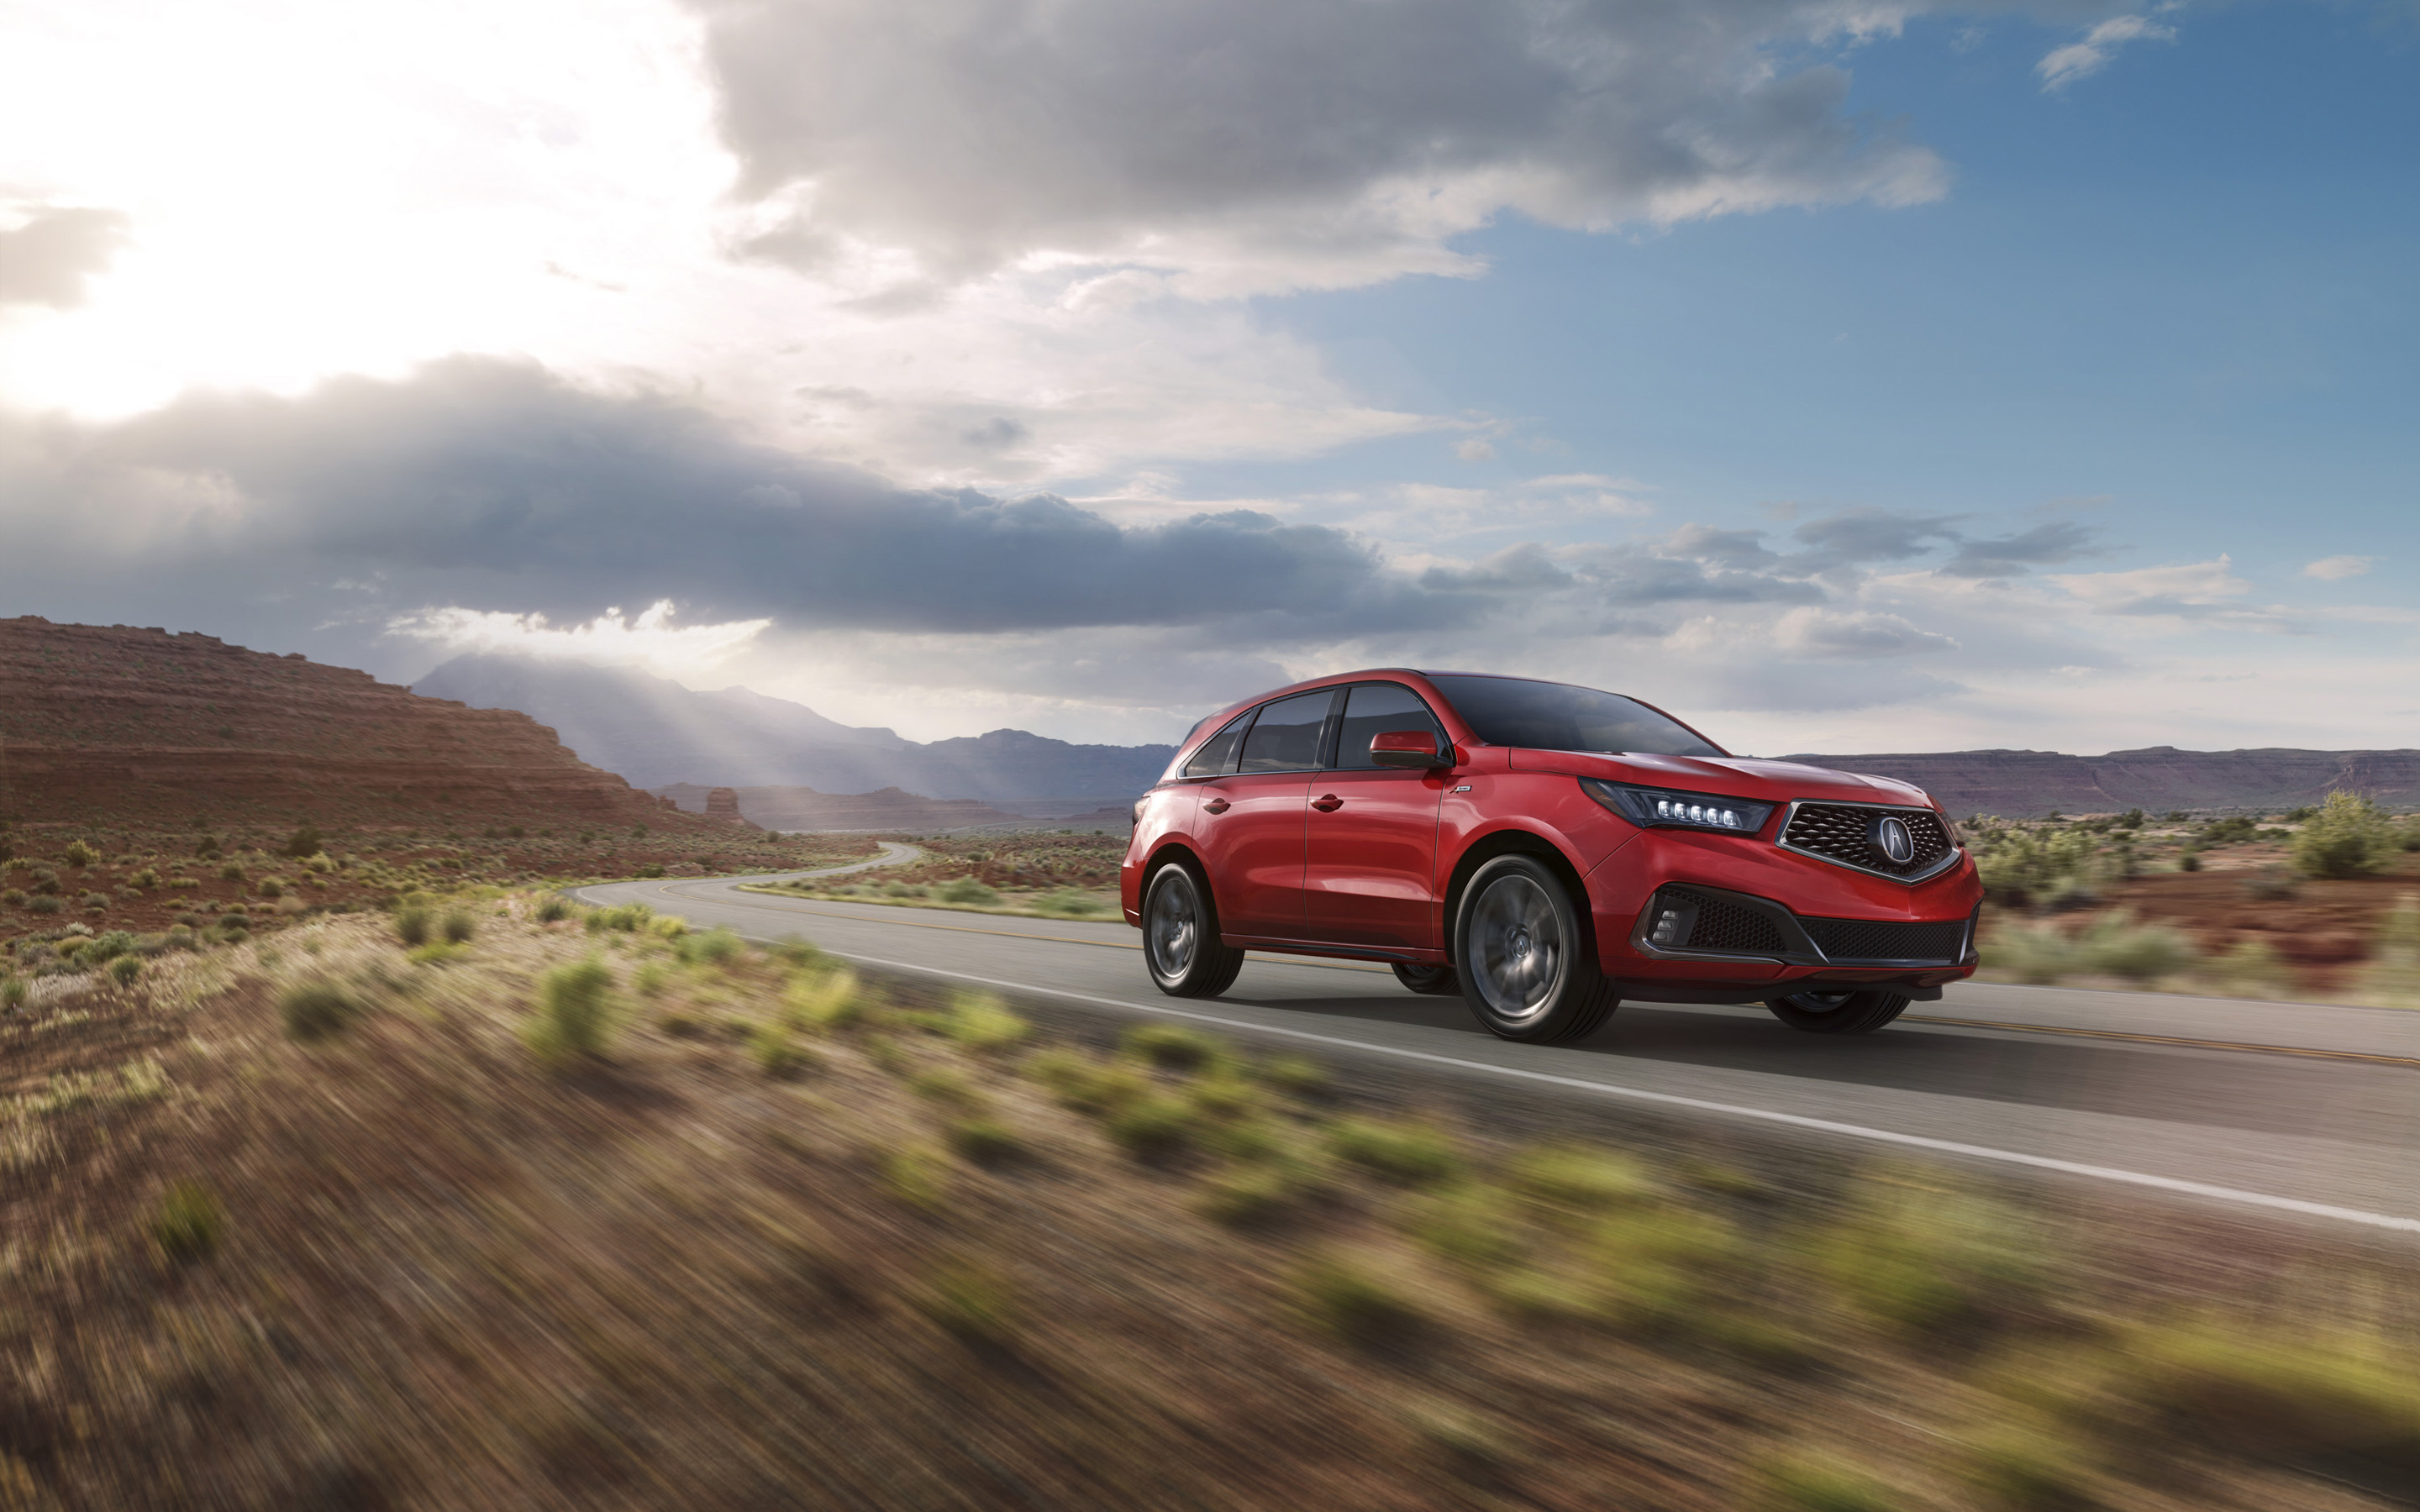 Acura MDX, Road 2019, Red MDX motion, High quality wallpapers, 2880x1800 HD Desktop